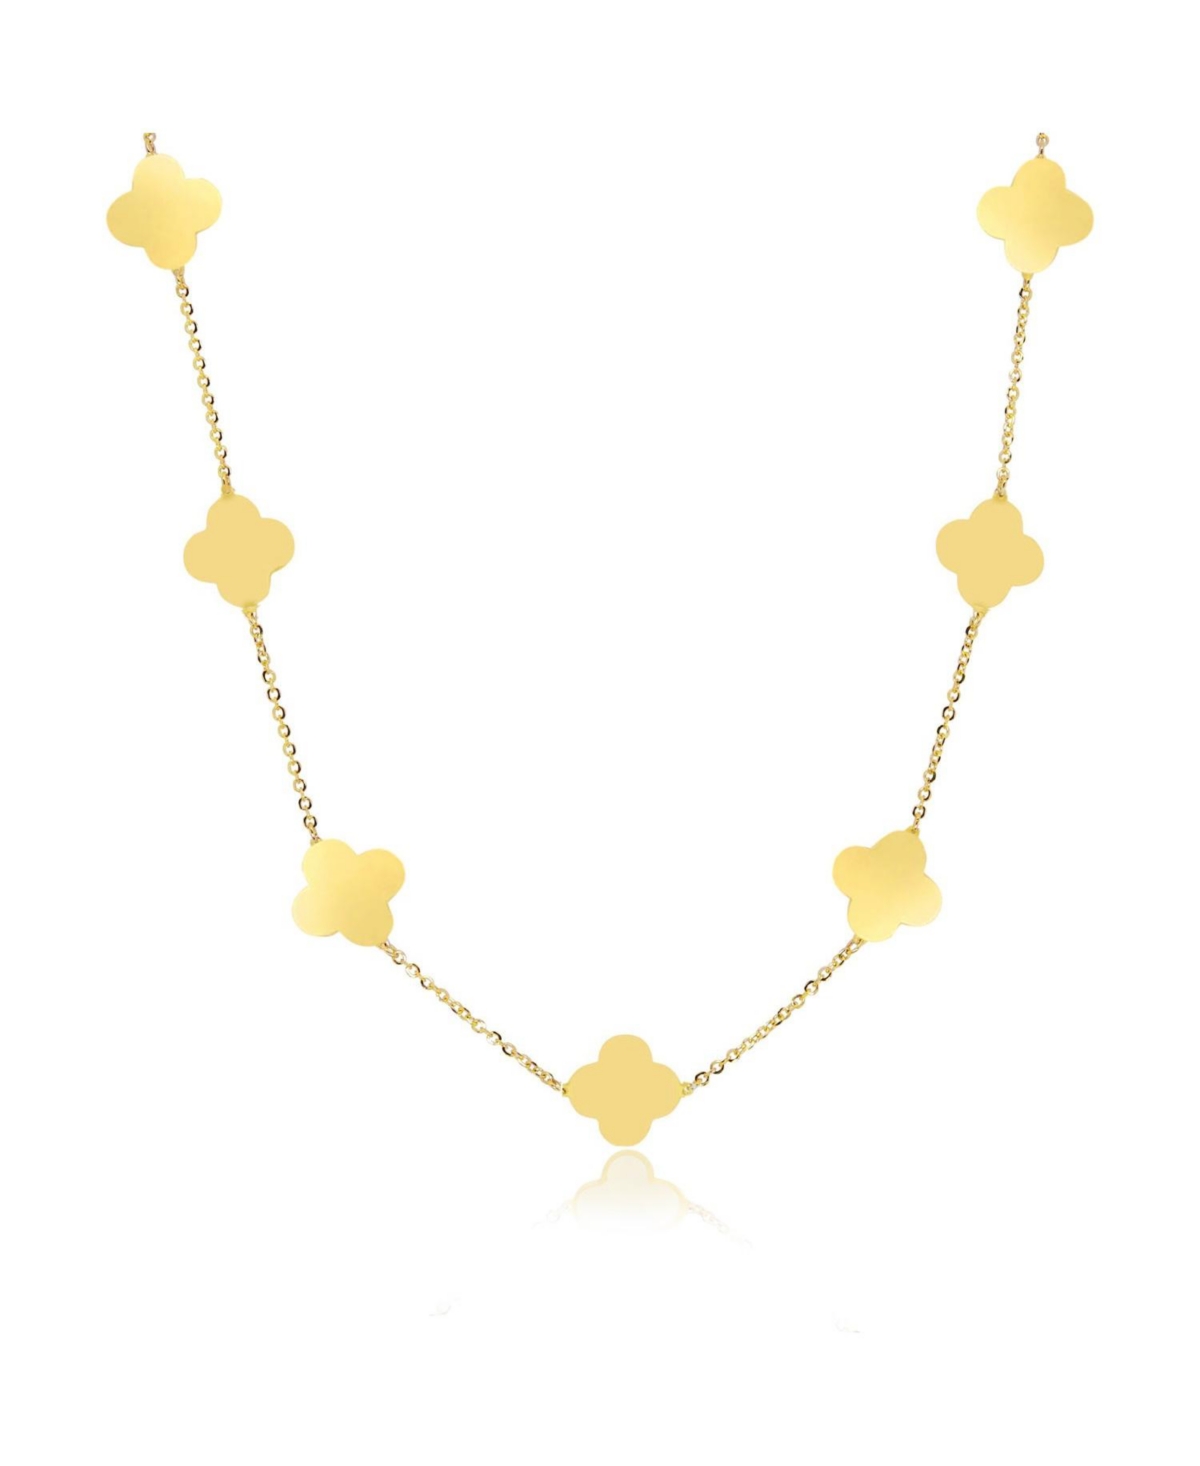 Small Gold Clover Necklace - Gold